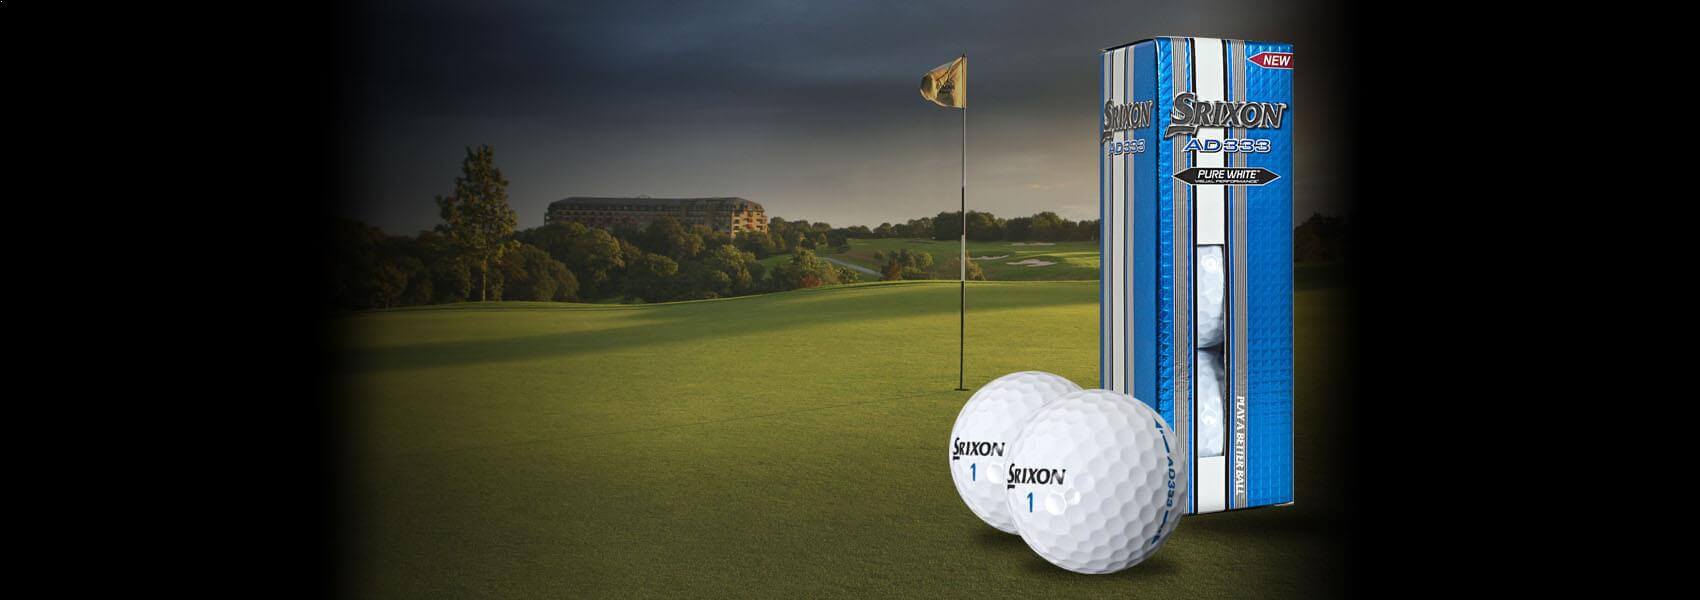 5 free rounds of golf, 5 greenfree 2 for 1 vouchers, three complimentary golf balls when you join by direct debit